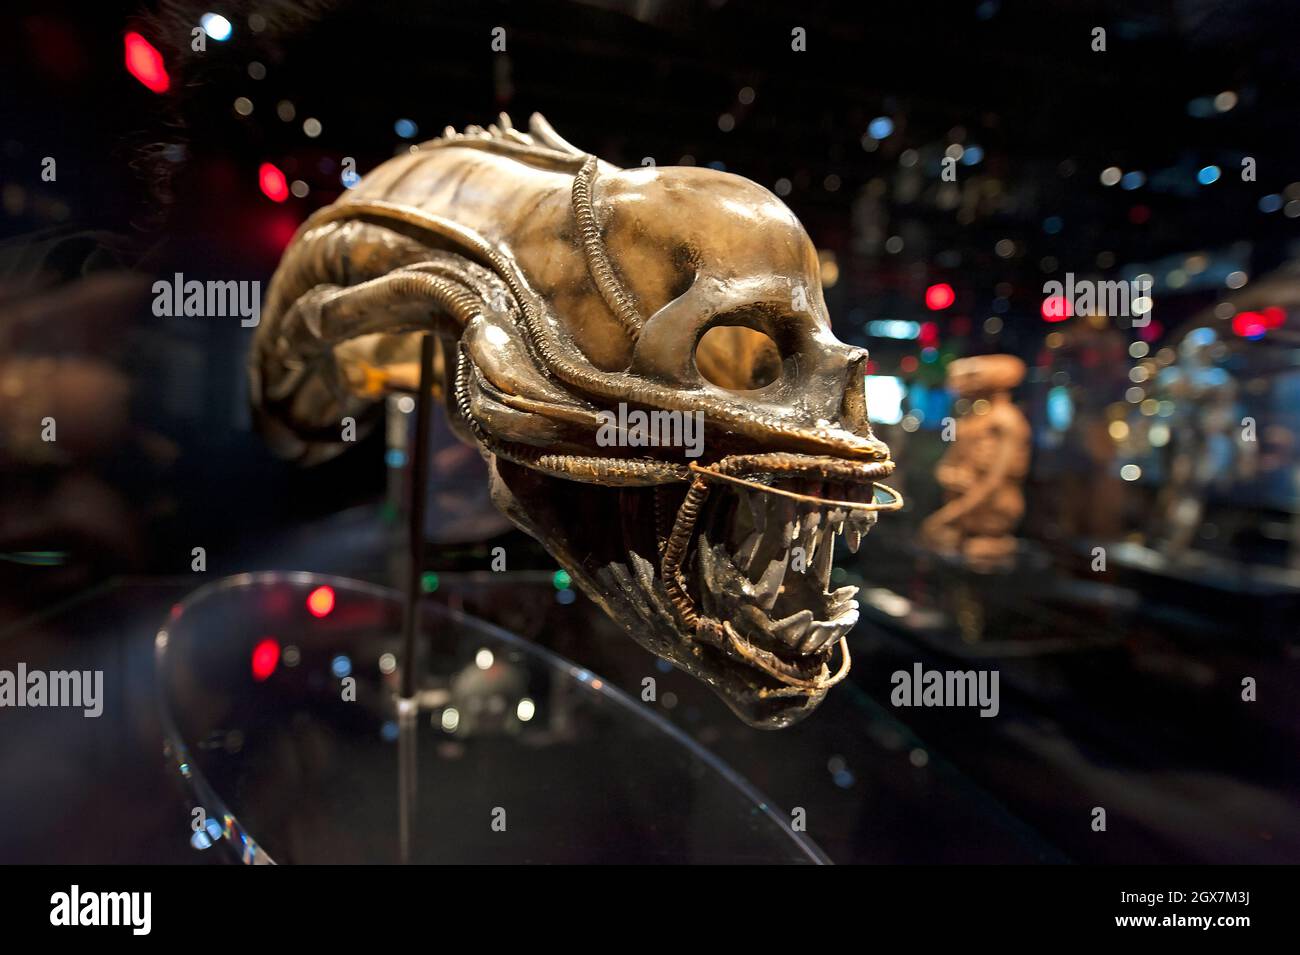 Alien based on design by H.R. Giger on display at the Academy Museum of Motion Pictures, Los Angeles, California Stock Photo